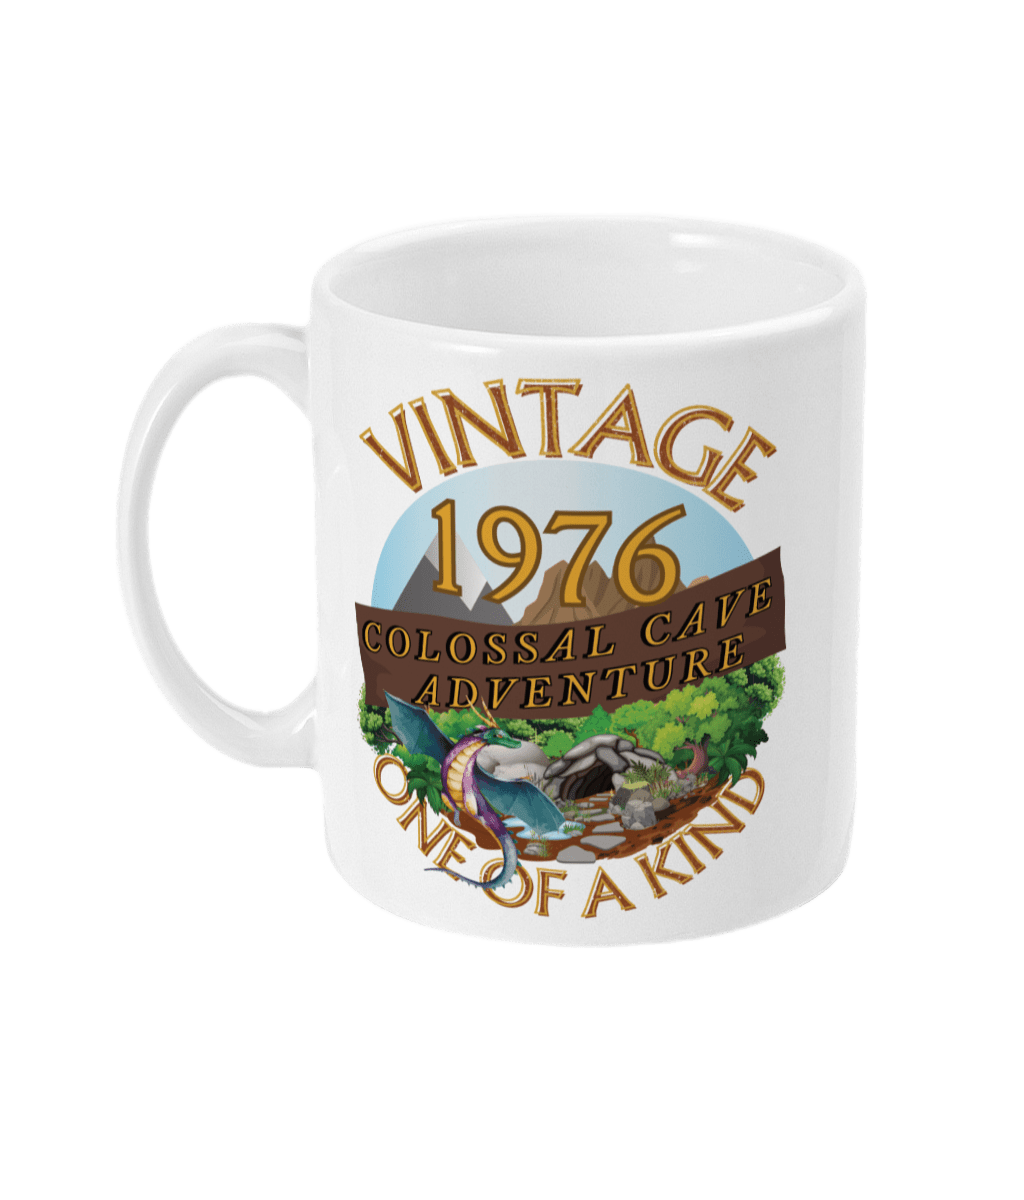 White mug with words vintage,1976,colossal cave adventure,one of a kind,circular picture of a dragon,cave and woodland,blue sky